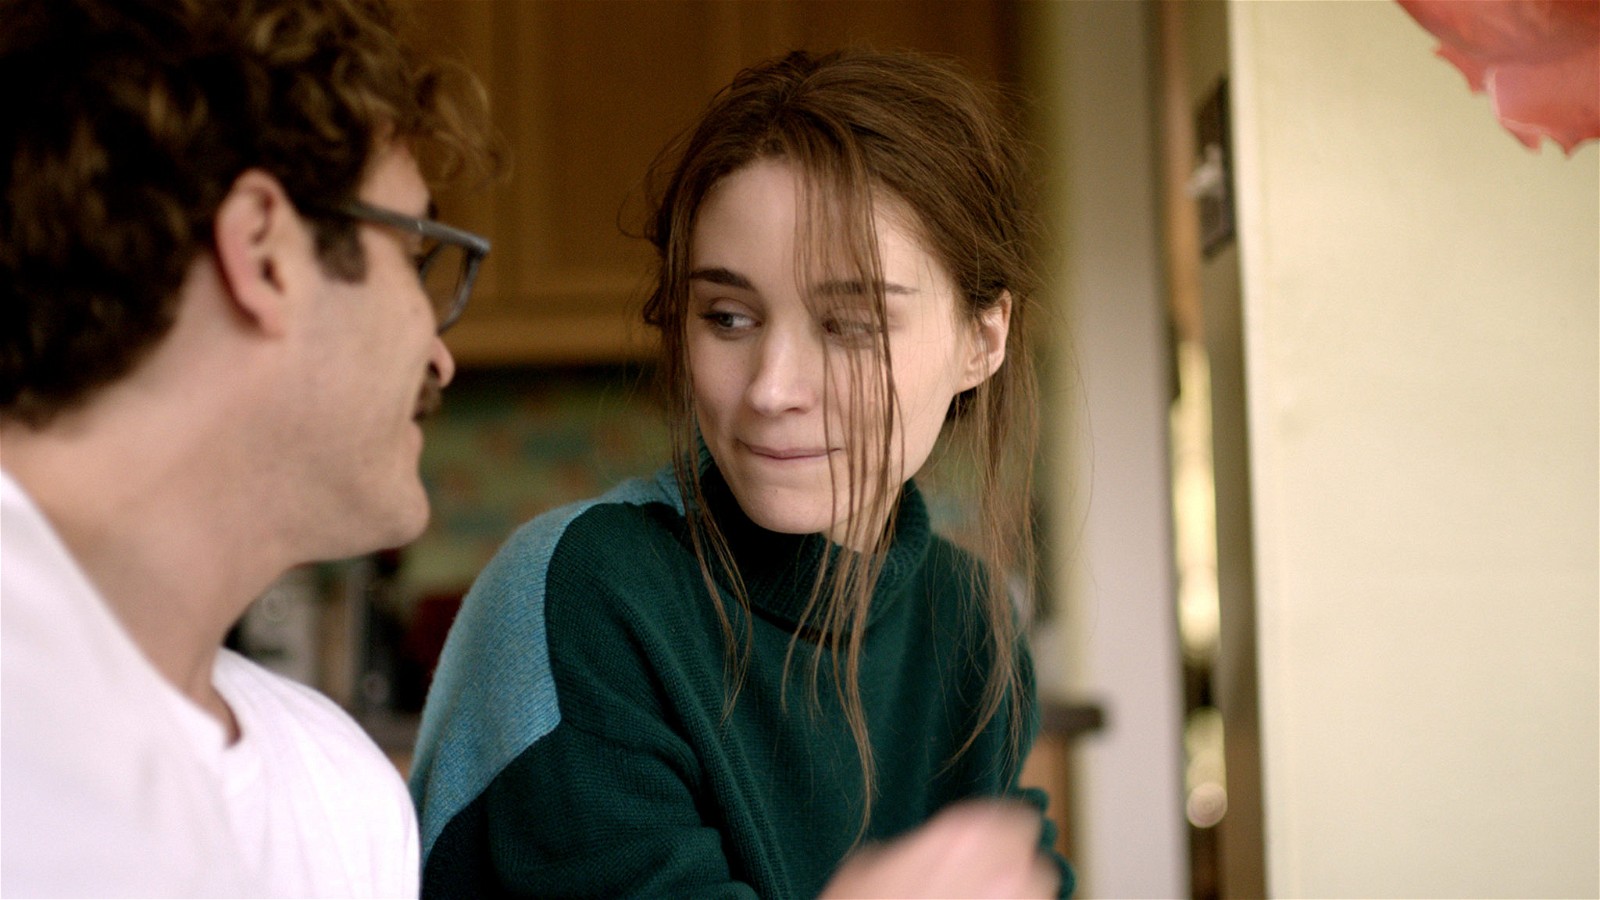 Joaquin Phoenix and Rooney Mara in a still from Her